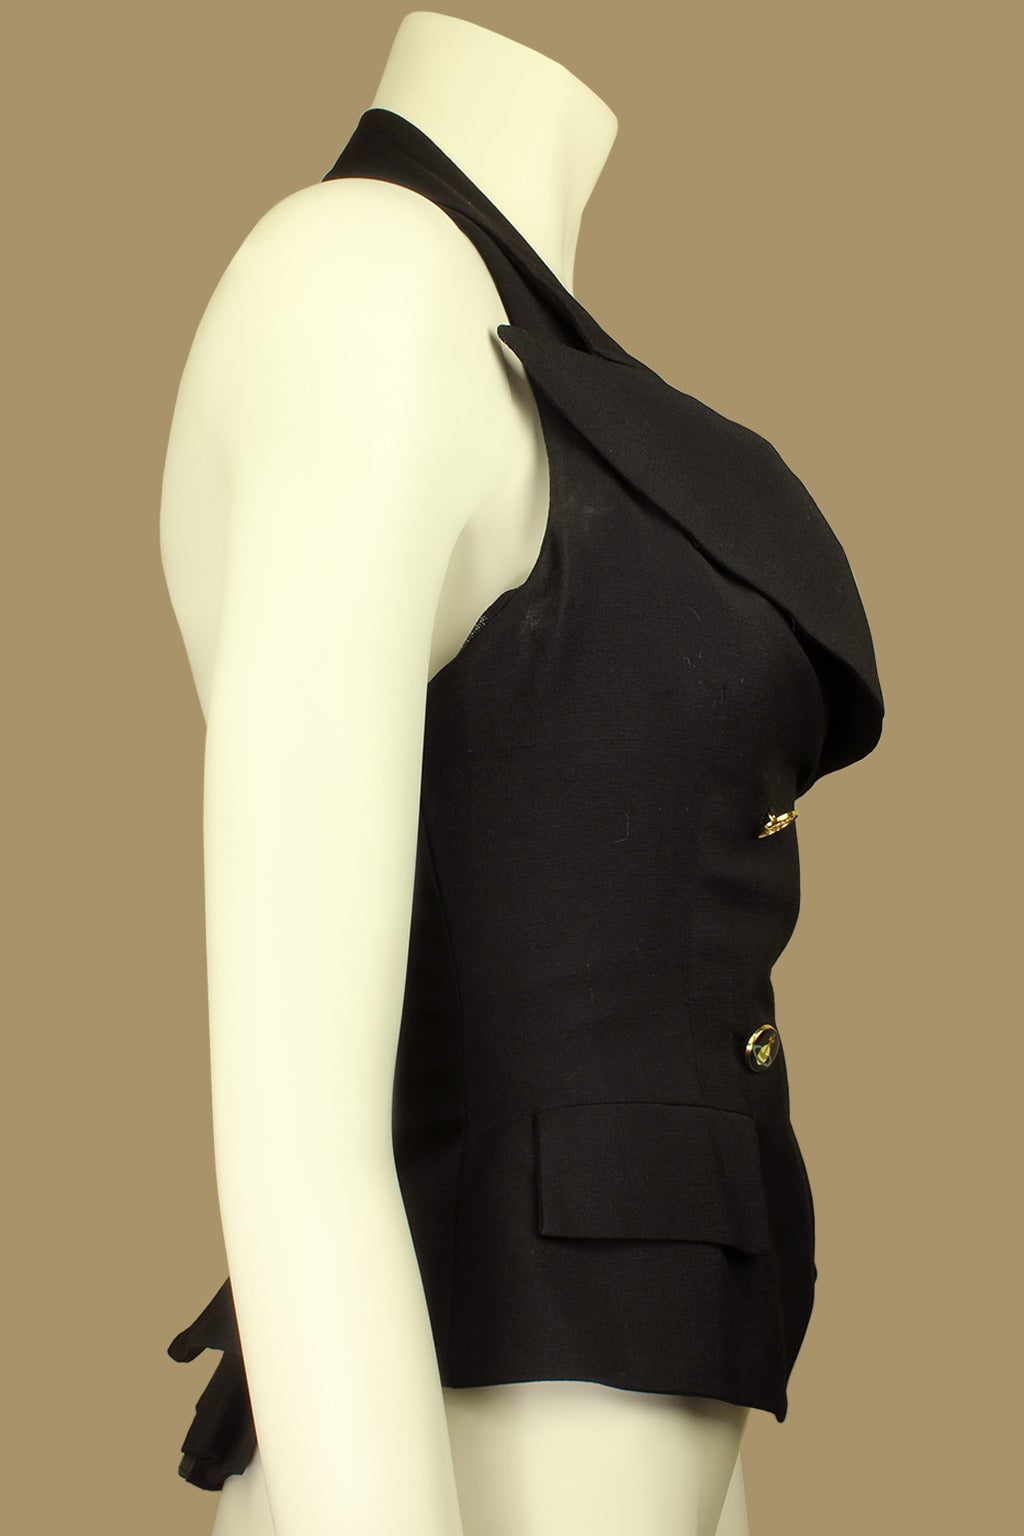 This flattering top has an intricate design. A zip front boned corset has a wool overlay attached with a halter neck, shawl collar, signature orb buttons, and two slash pockets. The back has a pleated peplum. It has a sexy, form fitting silhouette.